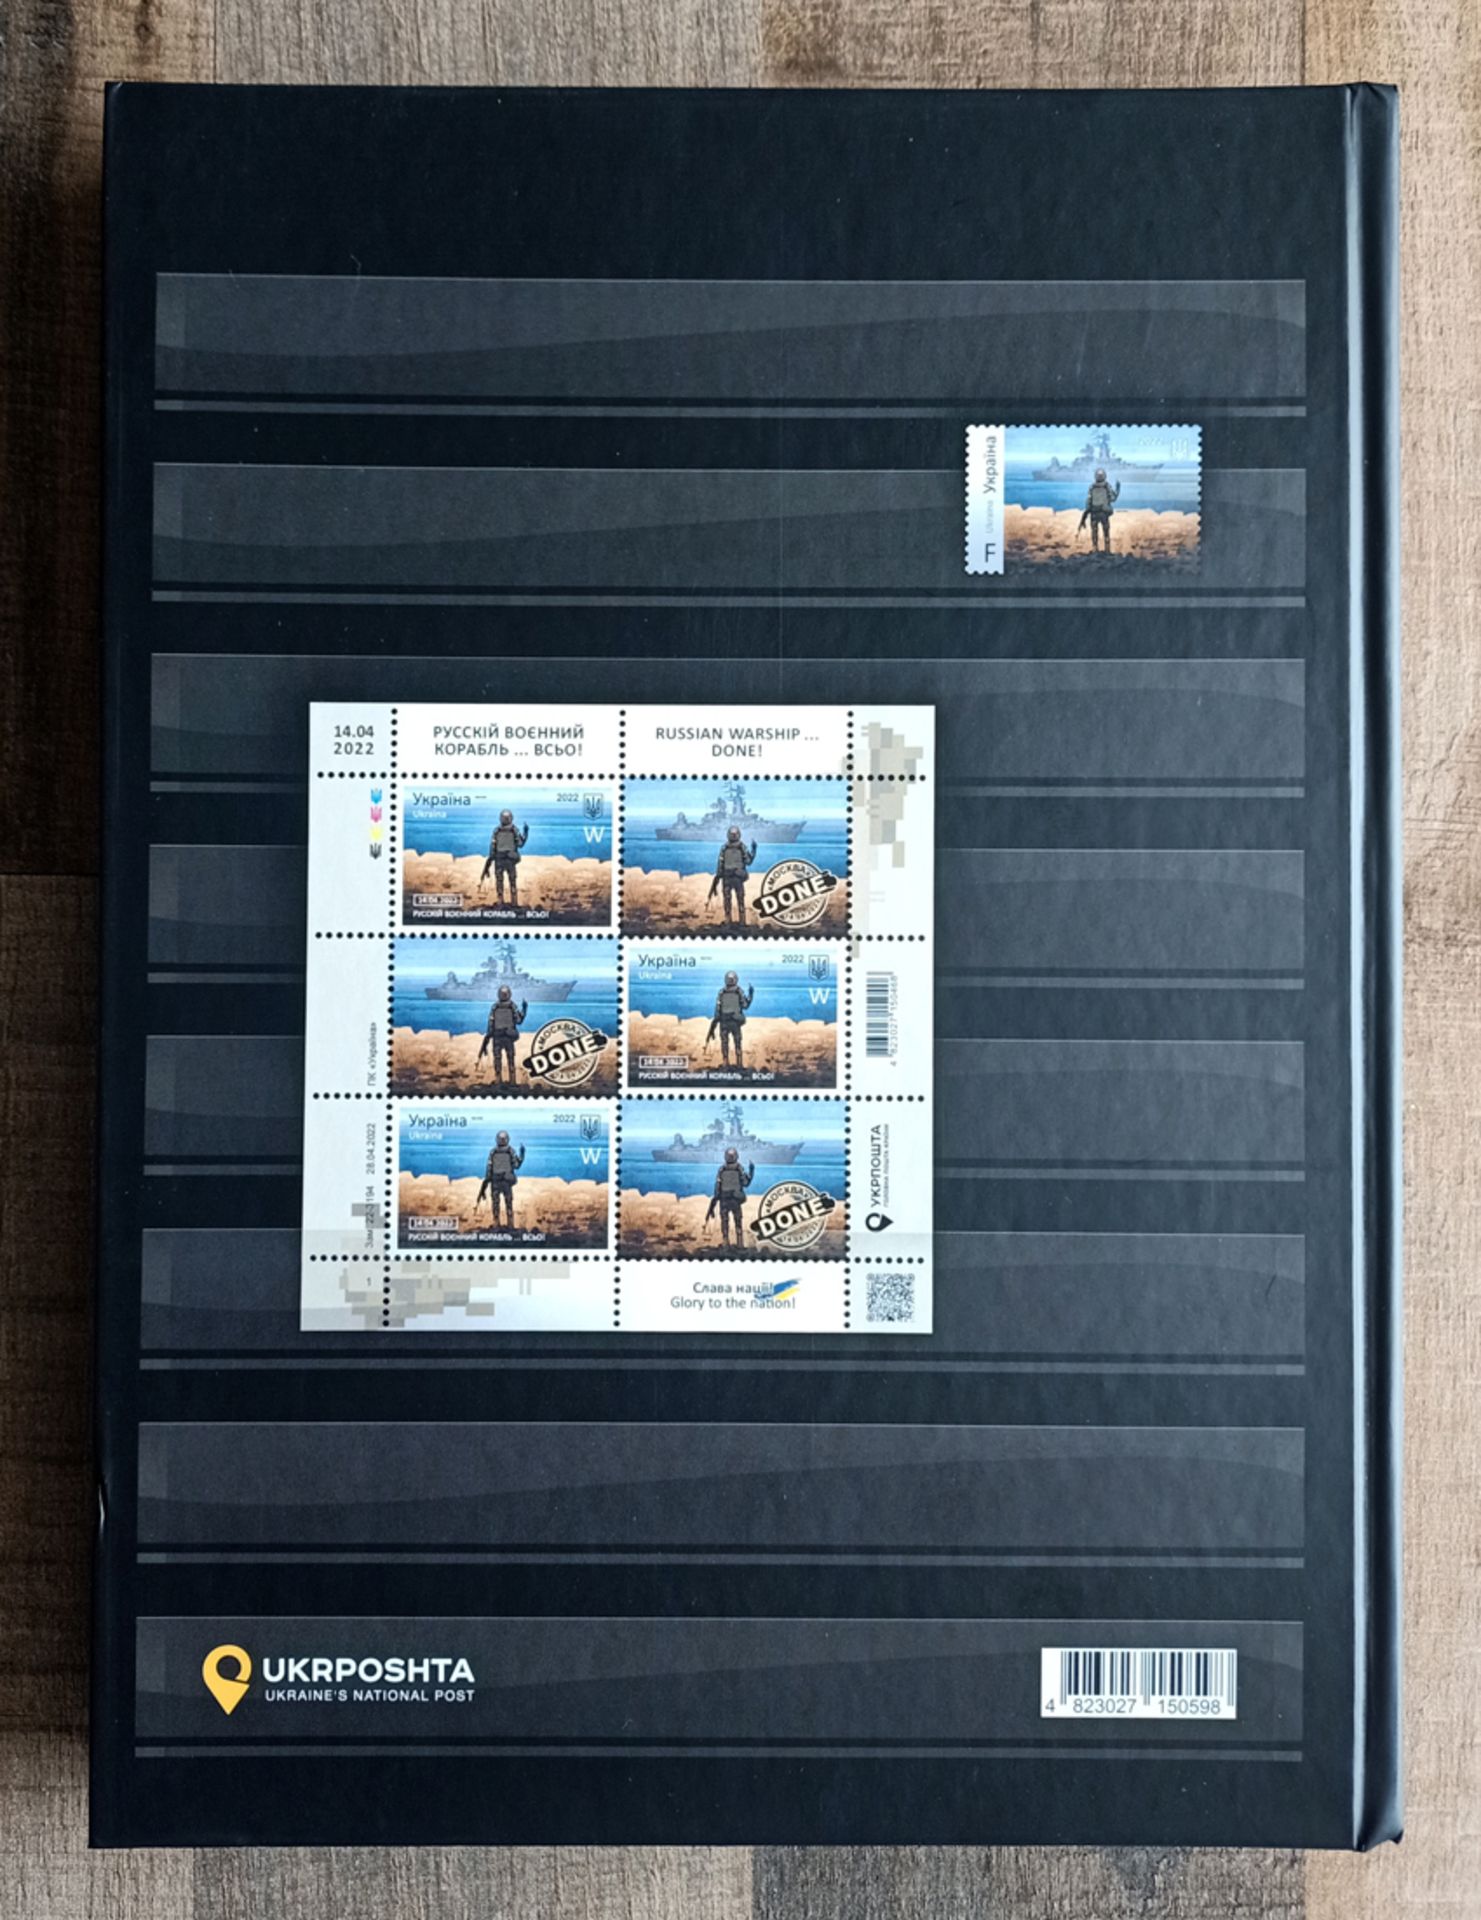 Ukraine ( With Banksy) Limited Postage Stamps WARtime Stockbook 2022-2023 Ukrposhta SOLD OUT (#0655) - Image 3 of 19